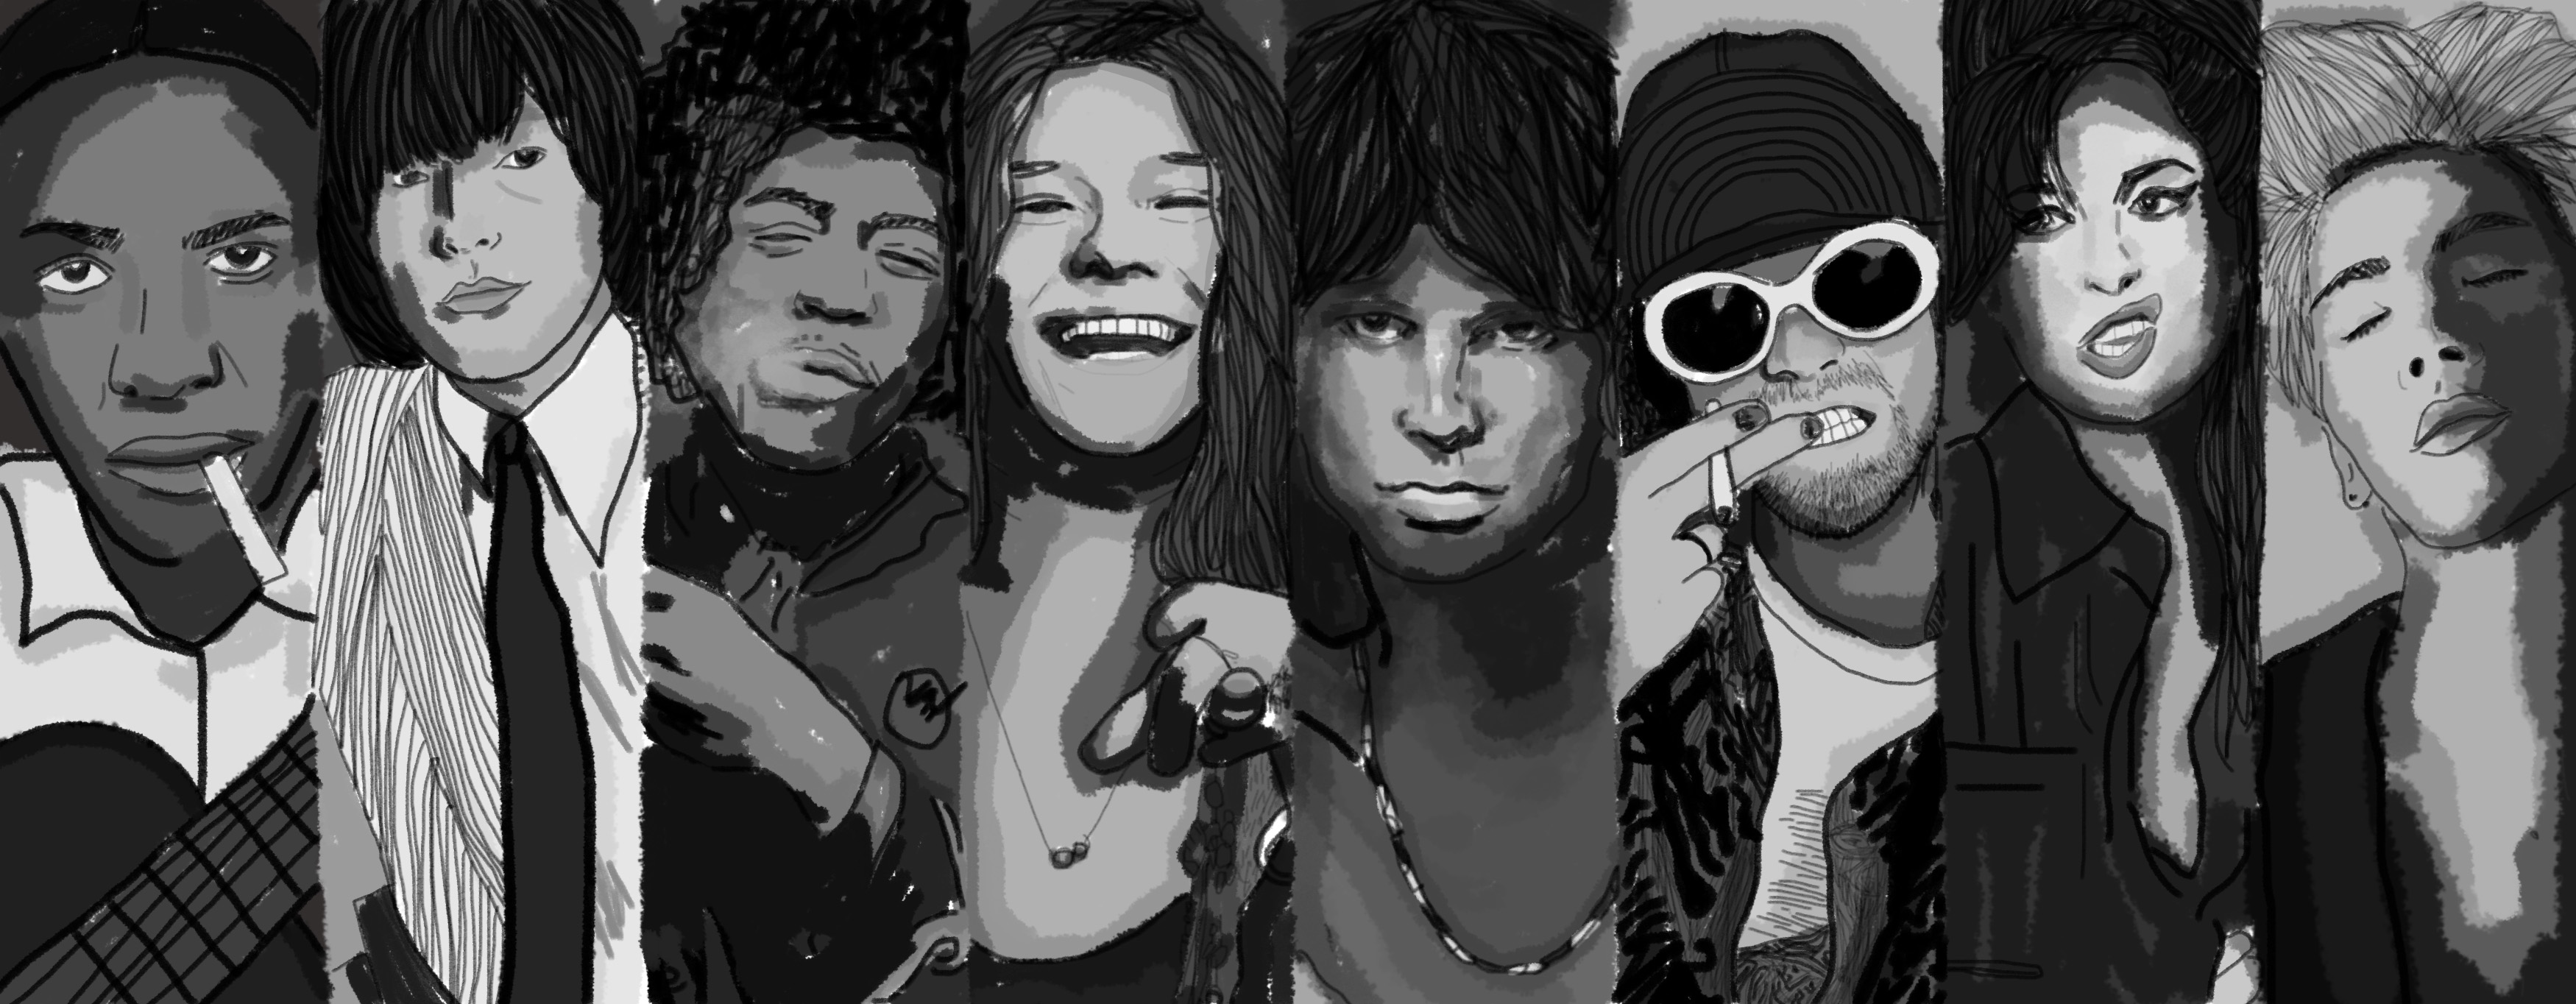 THE 27 CLUB : A Number of Mystery or Just a Coincidence